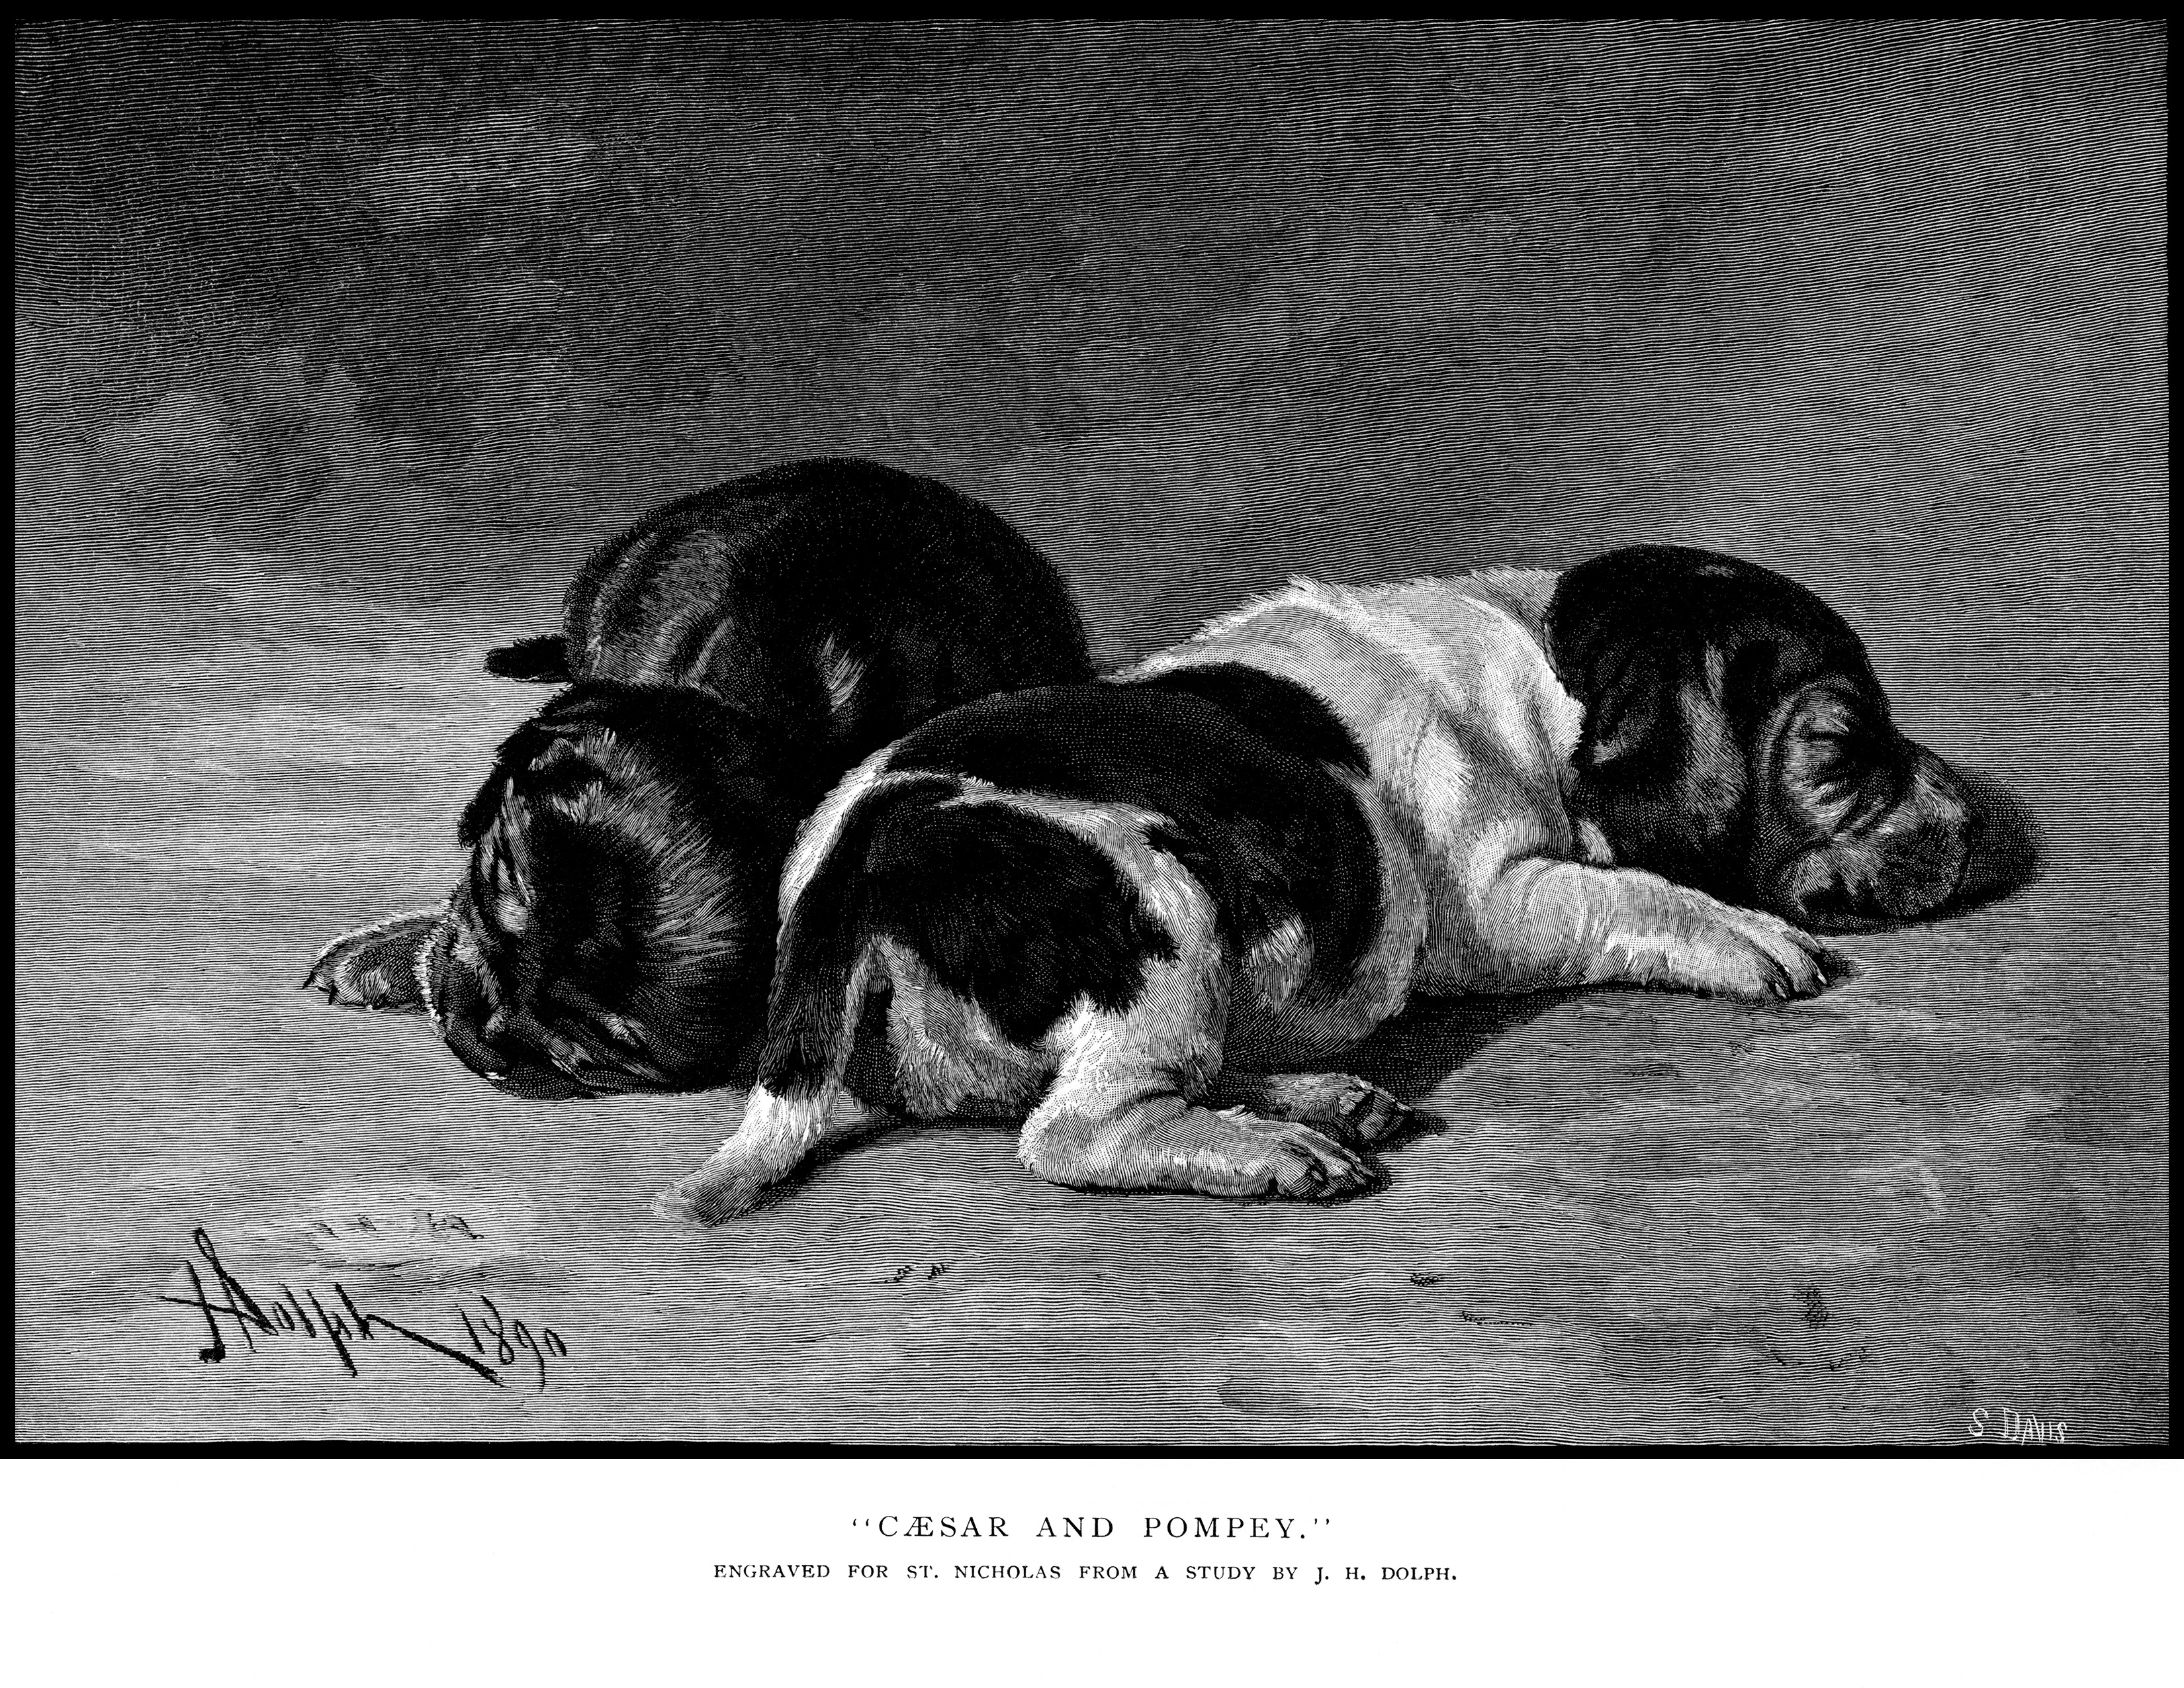 vintage puppy illustration, Tudor Jenks poetry, caesar and pompey poem, black and white graphics, sleeping dogs picture, dog poetry, old book page